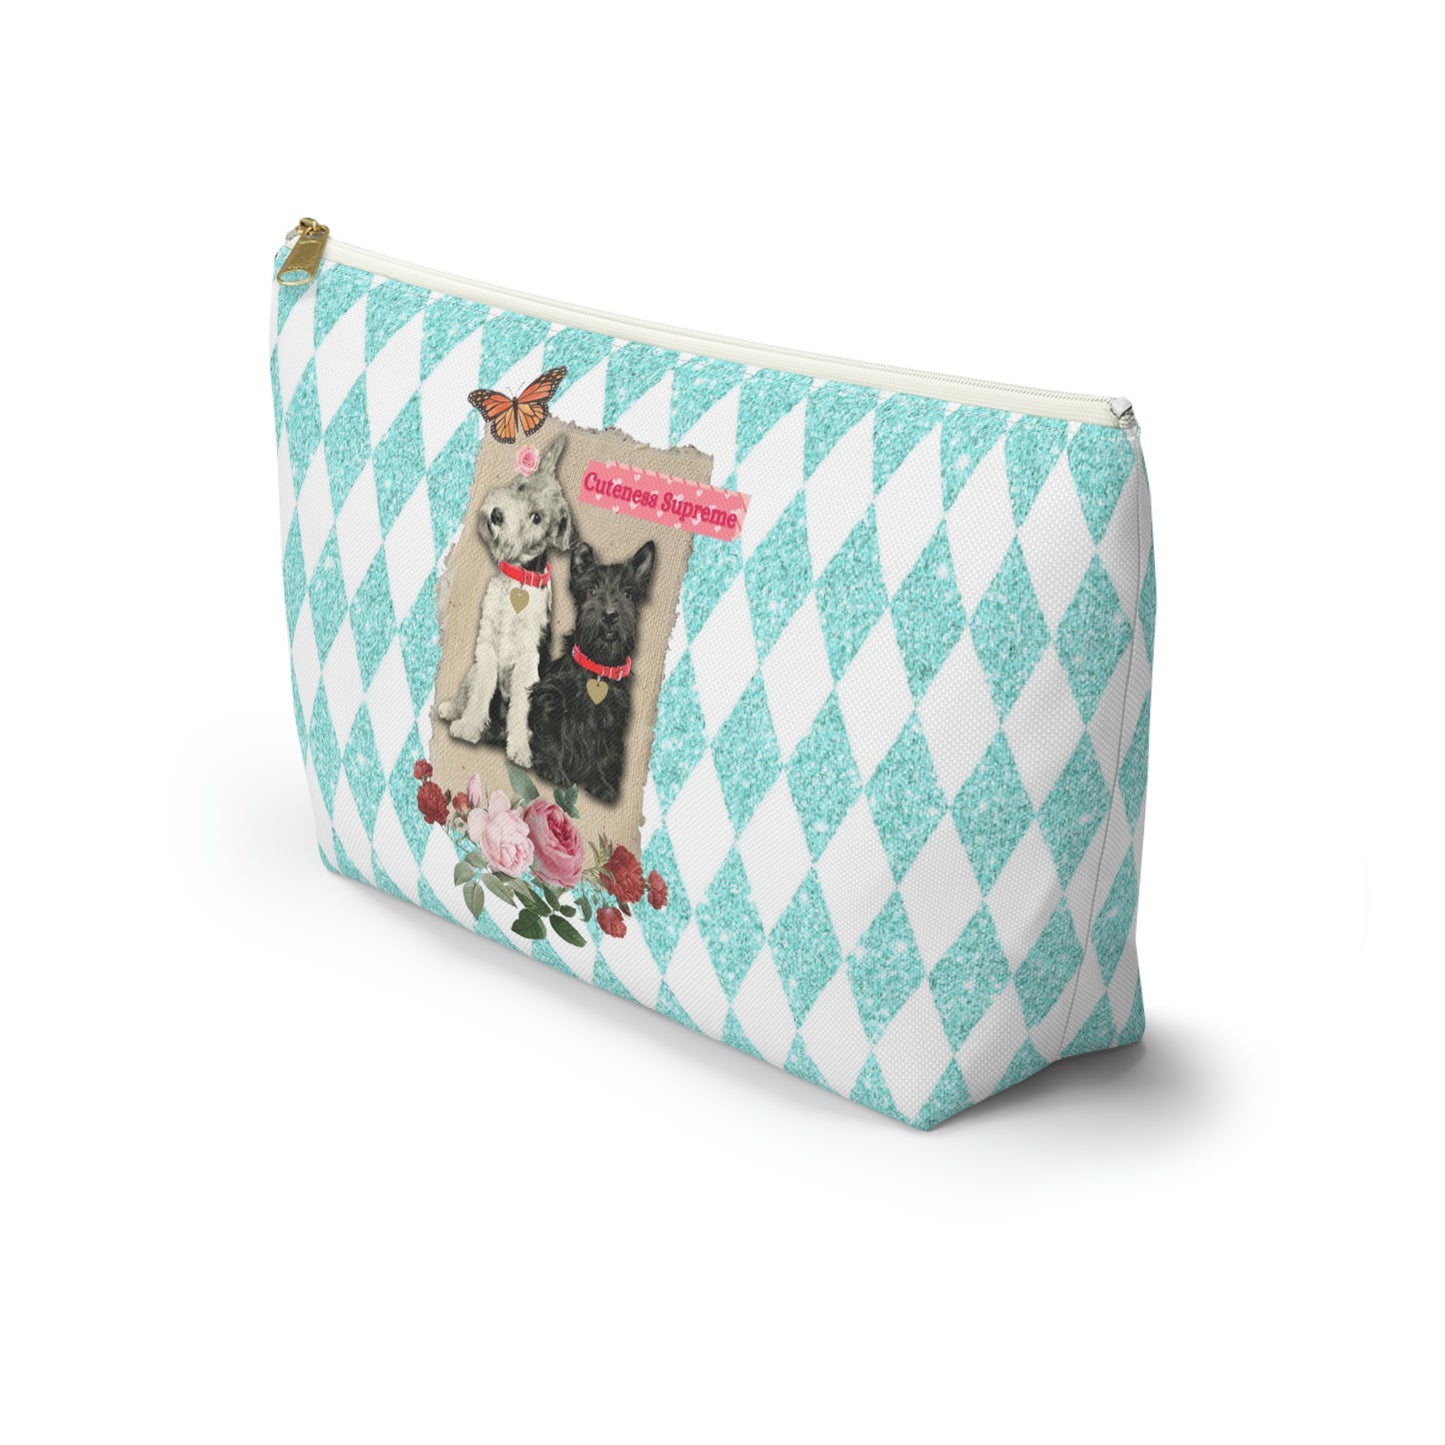 Super Cute T-Bottom Travel Pouch Makeup Bag, Jack Russell and Scotty Dog Graphic, Aqua Glitter Harlequin Print Background, Two Size Options